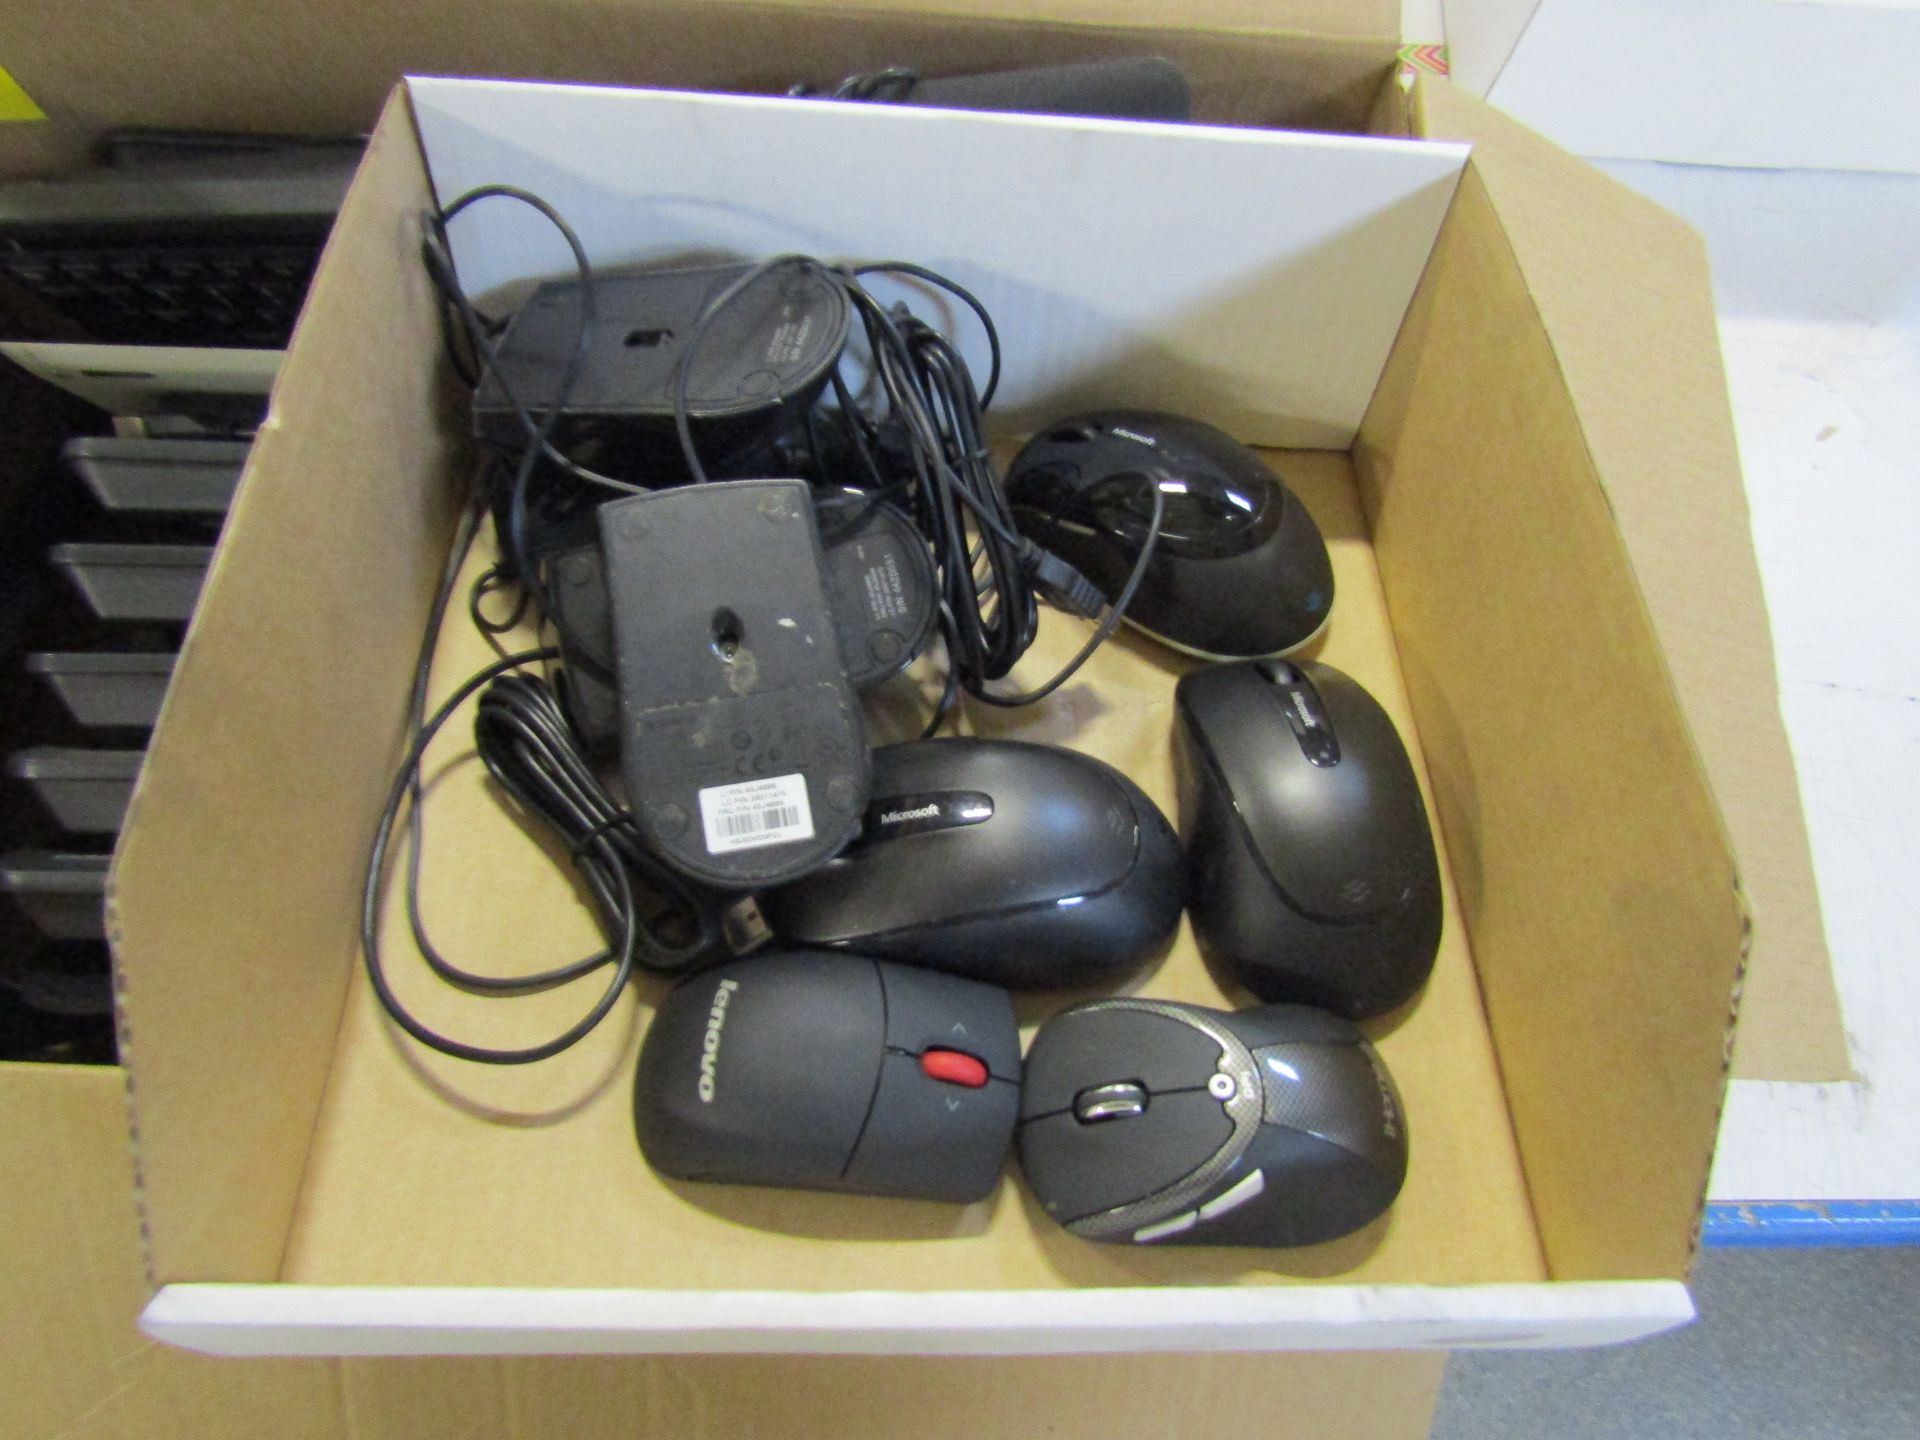 Misc. Keyboards and Mice, Wired And Wireless, No Dongles - Image 2 of 3